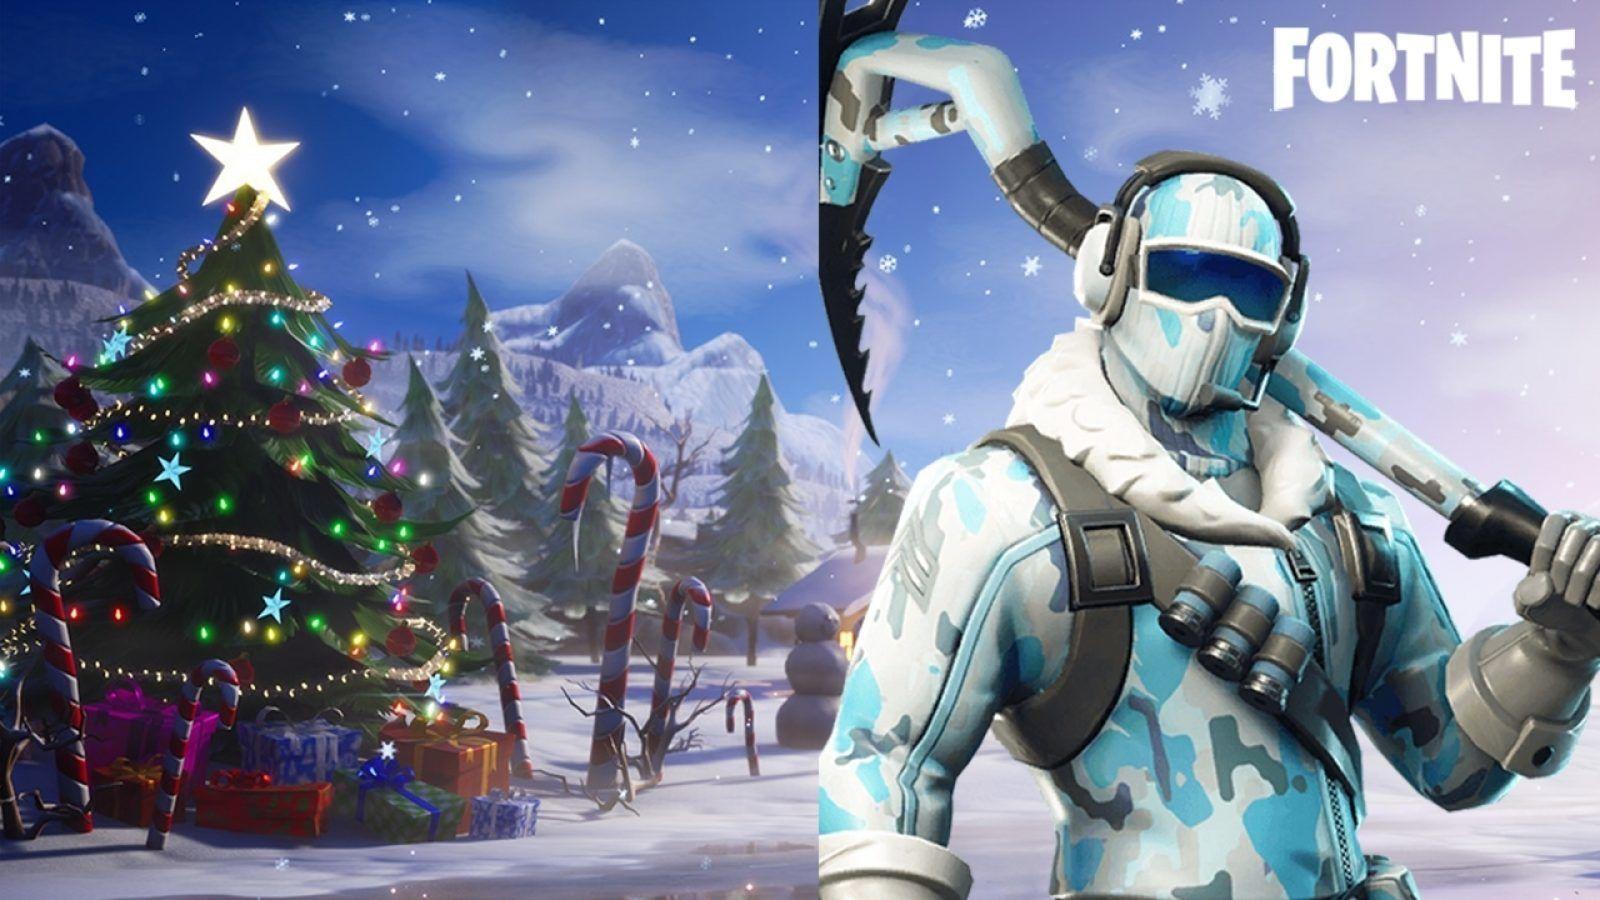 The Best Fortnite Related Christmas Presents For 2018!